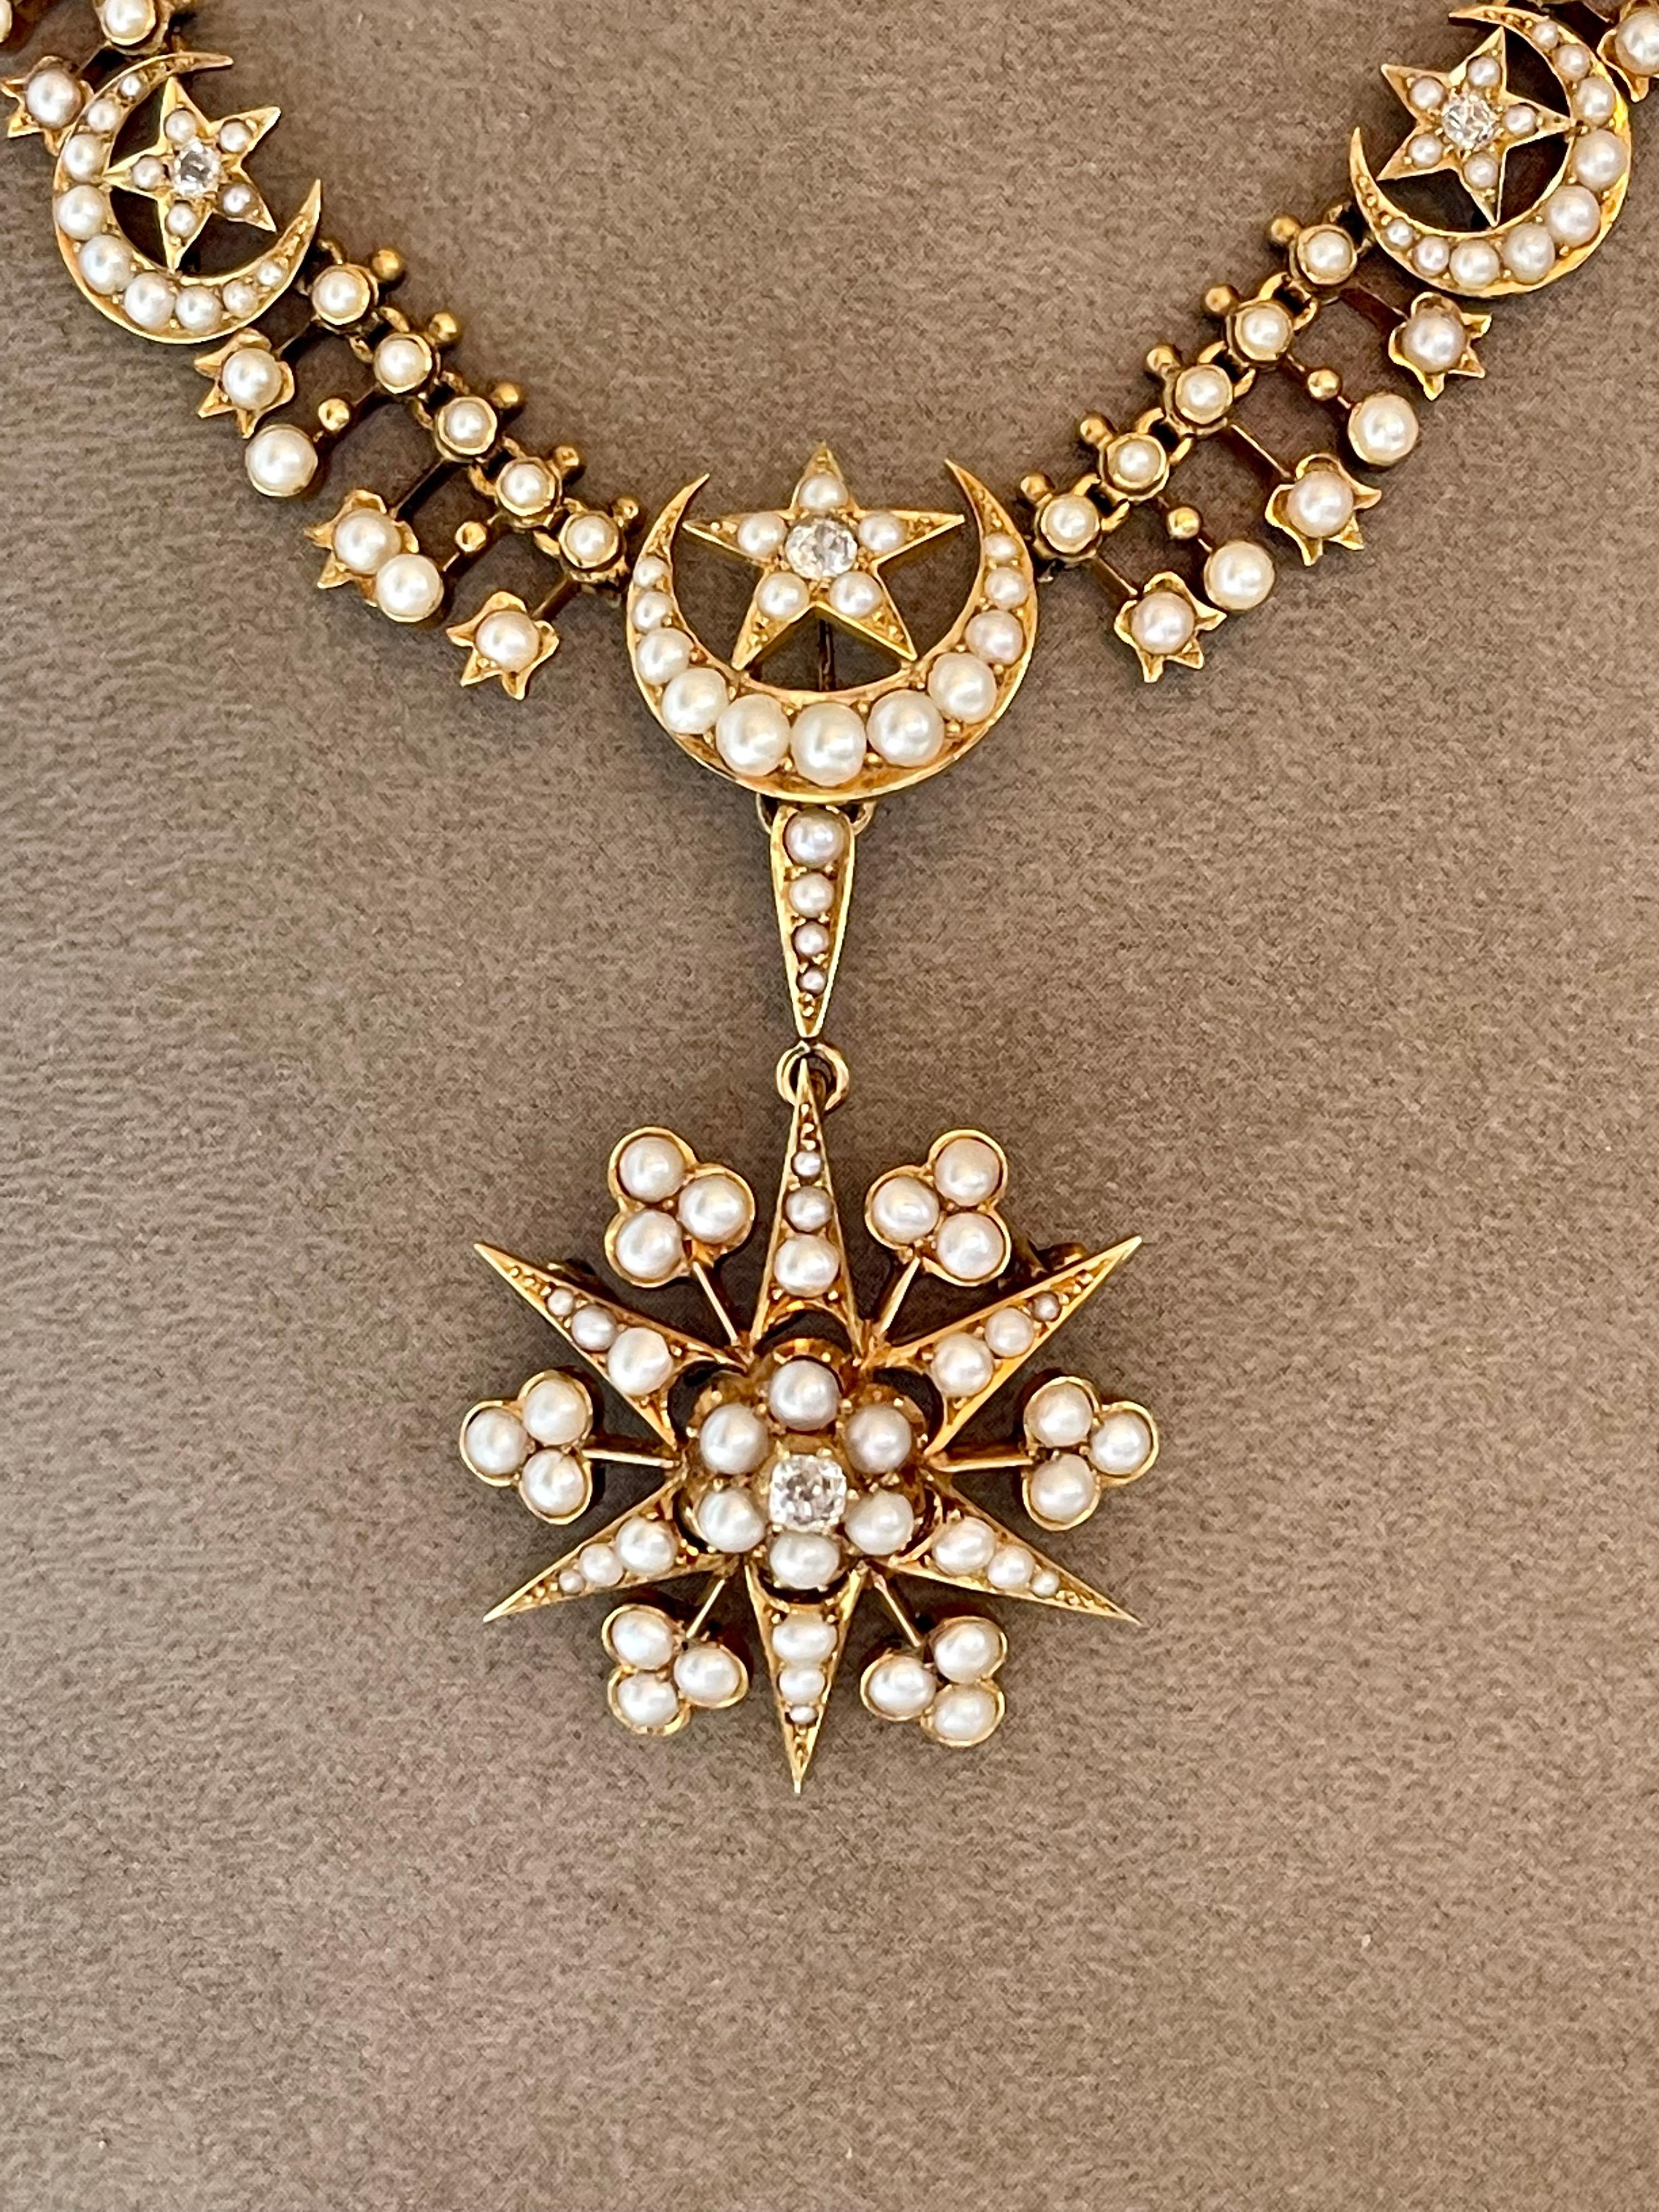 18 K Yellow Gold Victorian Star Necklace Pendant/Brooch Pearls Diamonds For Sale 7